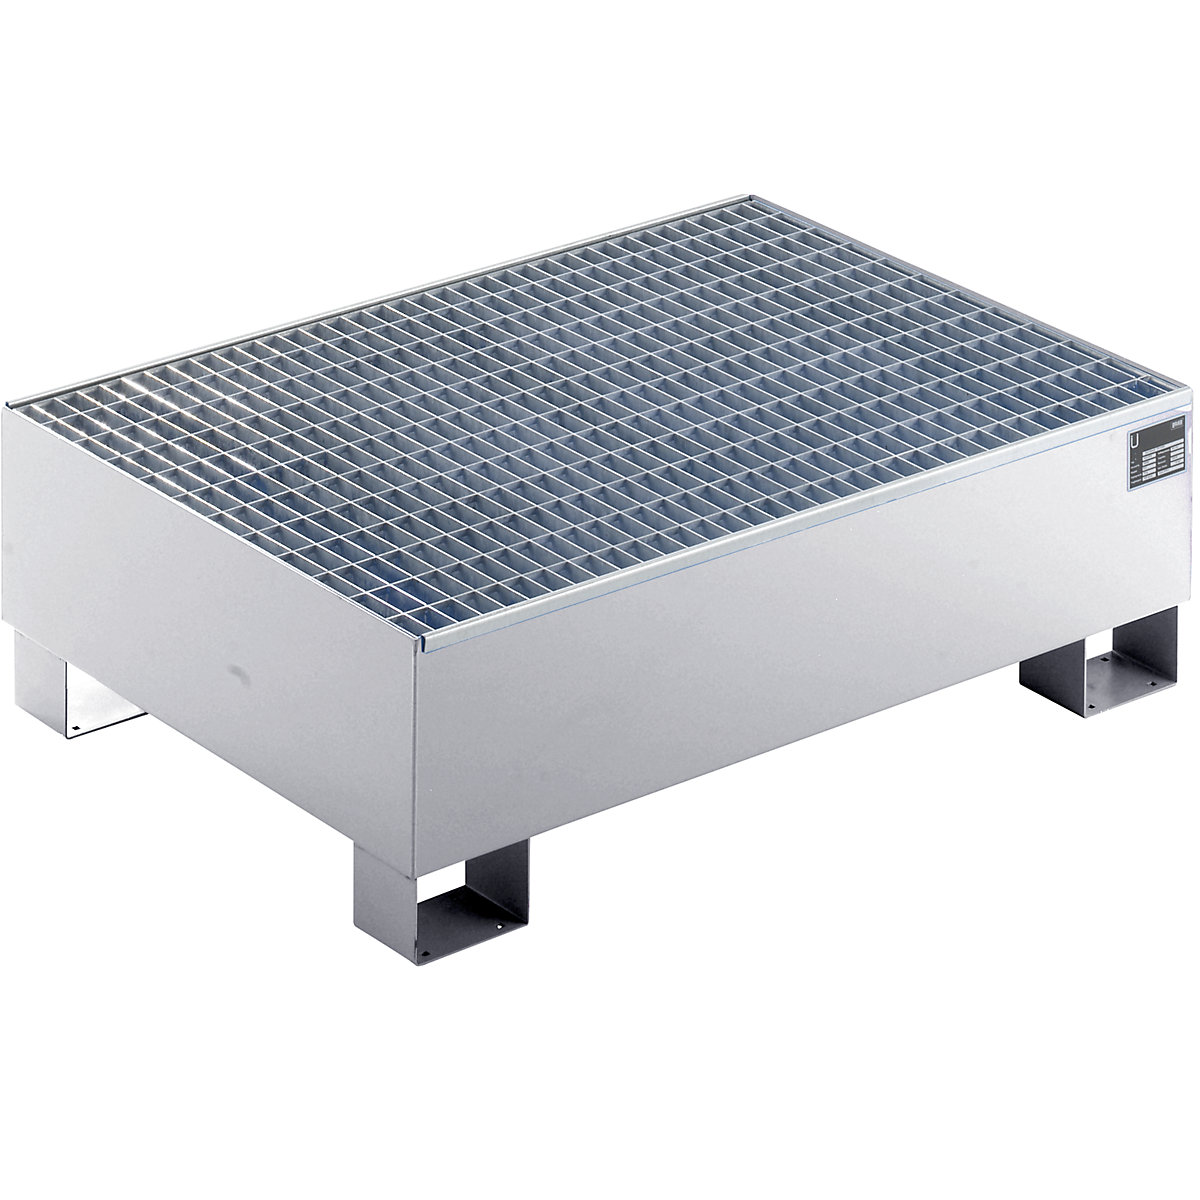 Sump tray made from sheet steel, LxWxH 1200 x 800 x 360 mm, hot dip galvanised, with grate-6